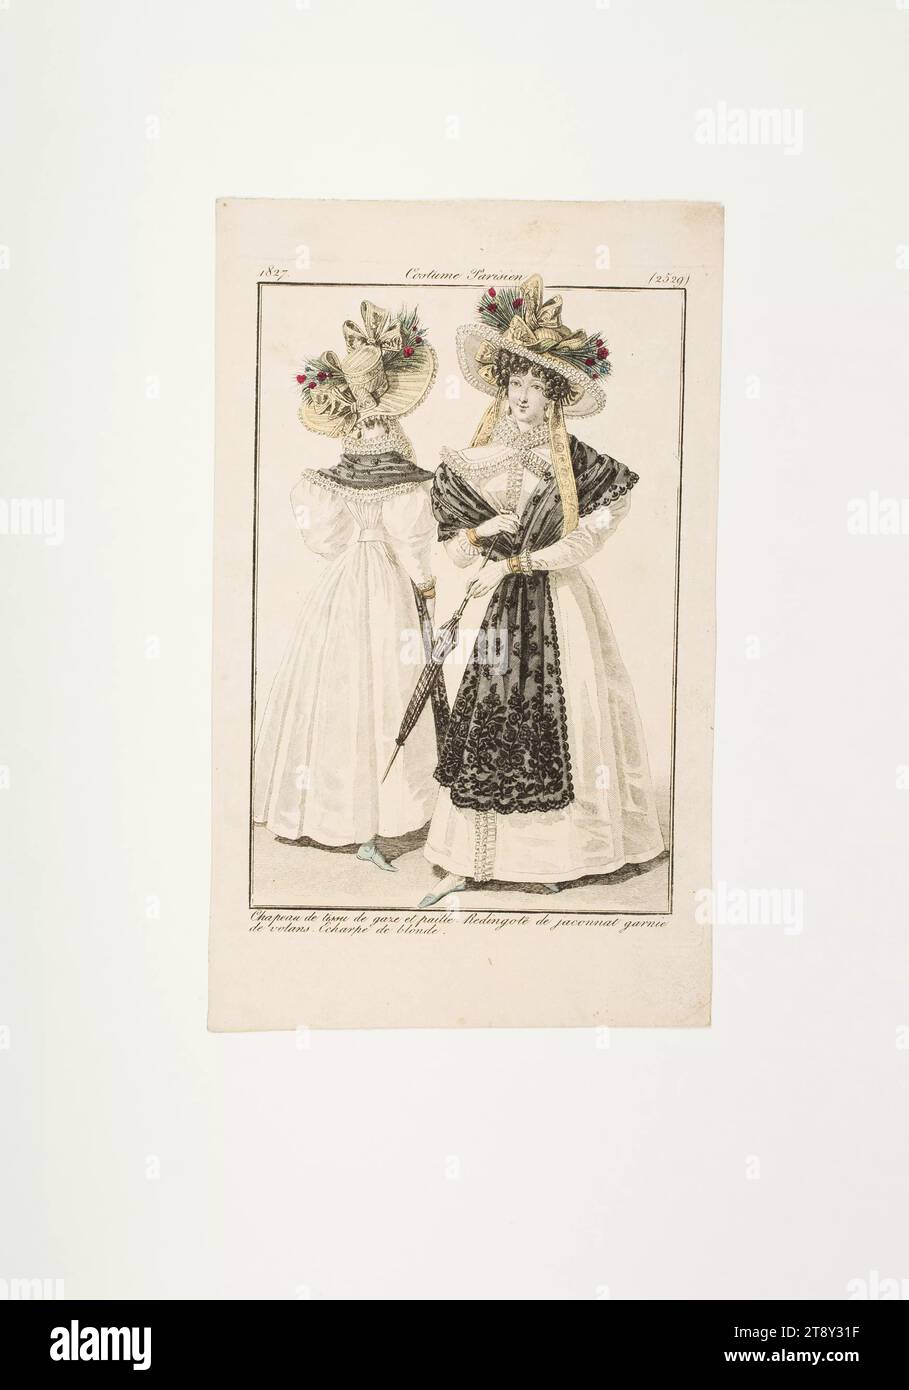 Fashion plate: 'Two French women with wide-brimmed hats, light coats and scarves', Unknown, 1827, paper, colorised, copperplate engraving, height 21, 4 cm, width 13, 1 cm, plate size 16×11 cm, Fashion, Bourgeoisie, Biedermeier, fashion plates, head-gear, coat, woman, neck-gear  clothing, dress, gown, The Vienna Collection Stock Photo